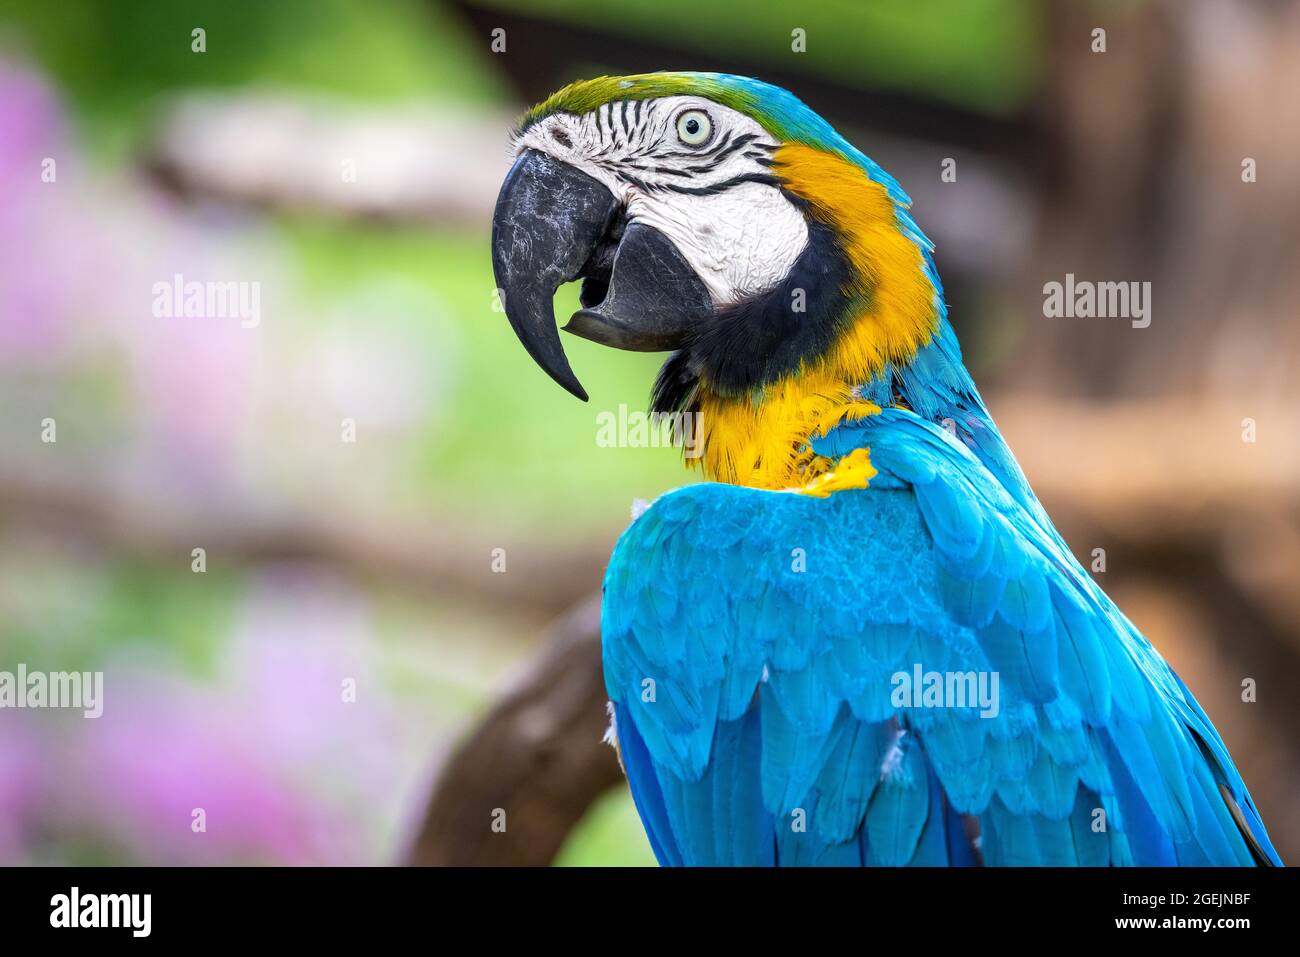 Close up profile portrait of a colorful blue and yellow macaw parrot, against a bokeh background Stock Photo